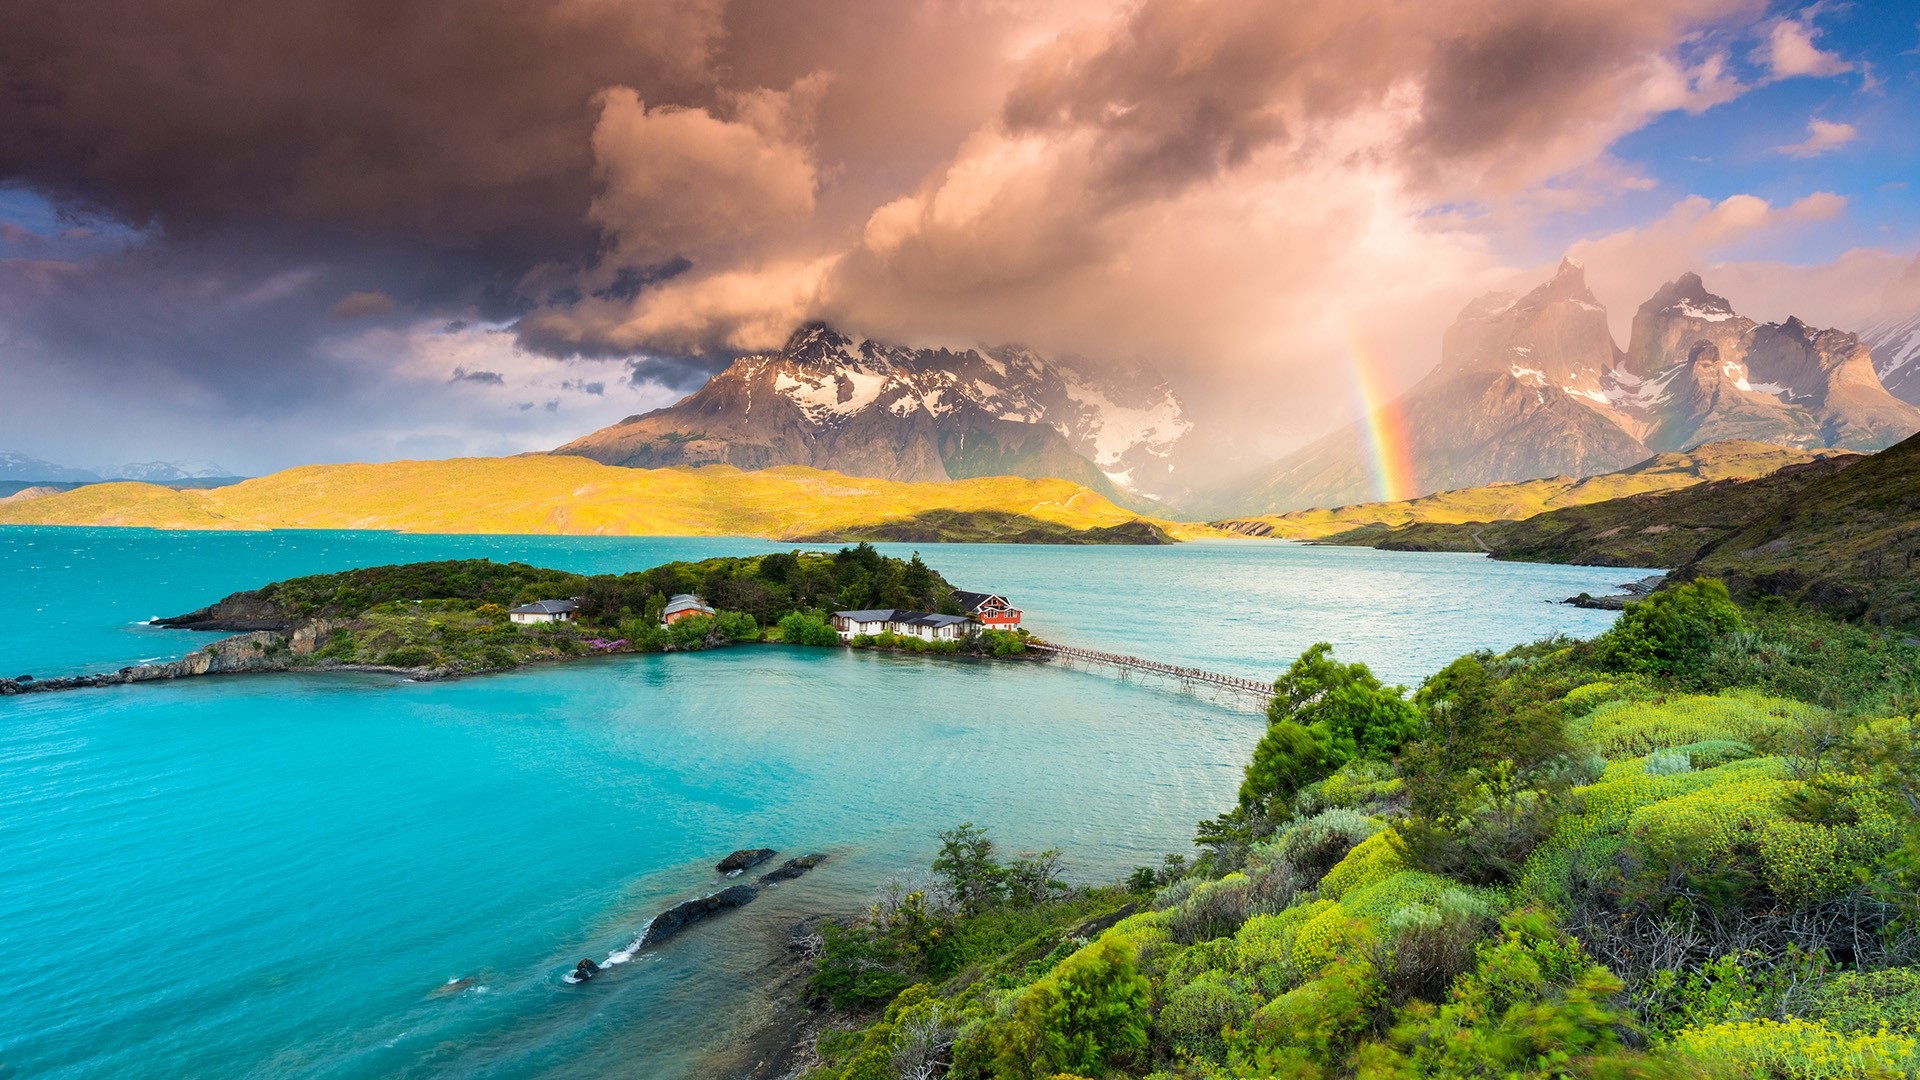 Sweet Background From Microsoft This Morning - Patagonia Chile Windows 10 , HD Wallpaper & Backgrounds